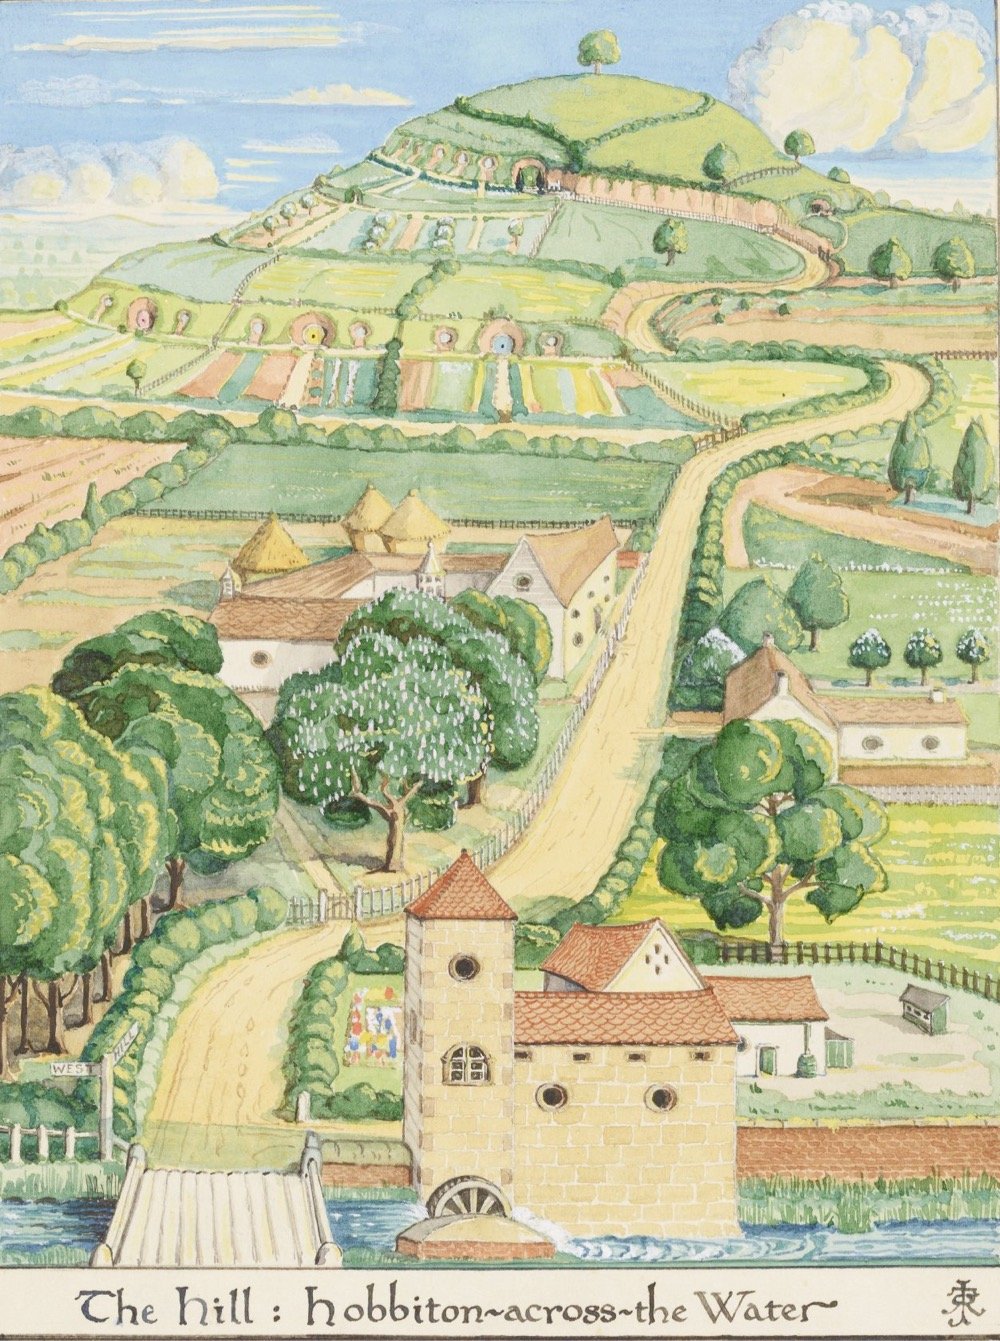 painting by J.R.R. Tolkien of Hobbiton